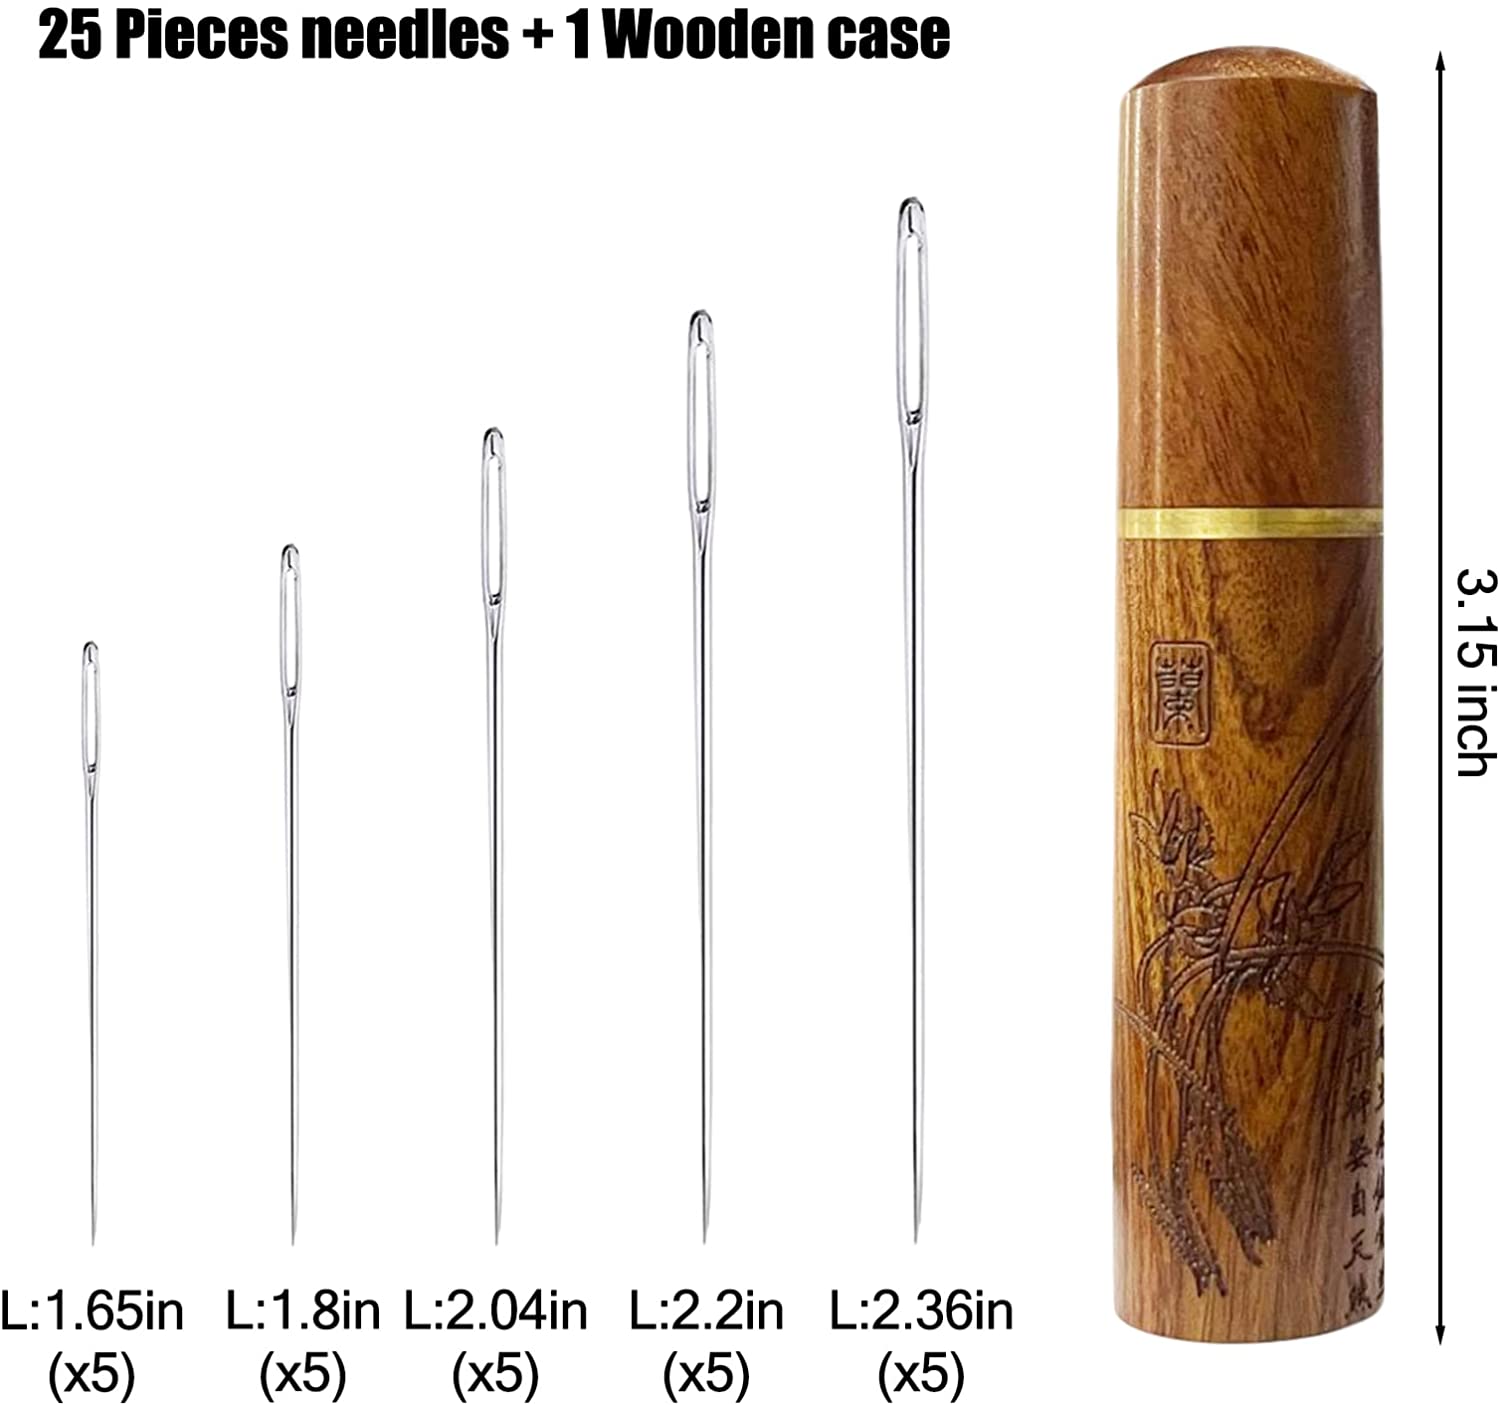 Sewing Needles Large Eye Hand Sewing - 25 Pieces Embroidery Needles for  Hand Sewing,Hand Sewing Needles,Large Eye Sewing Needles with Wooden Needle